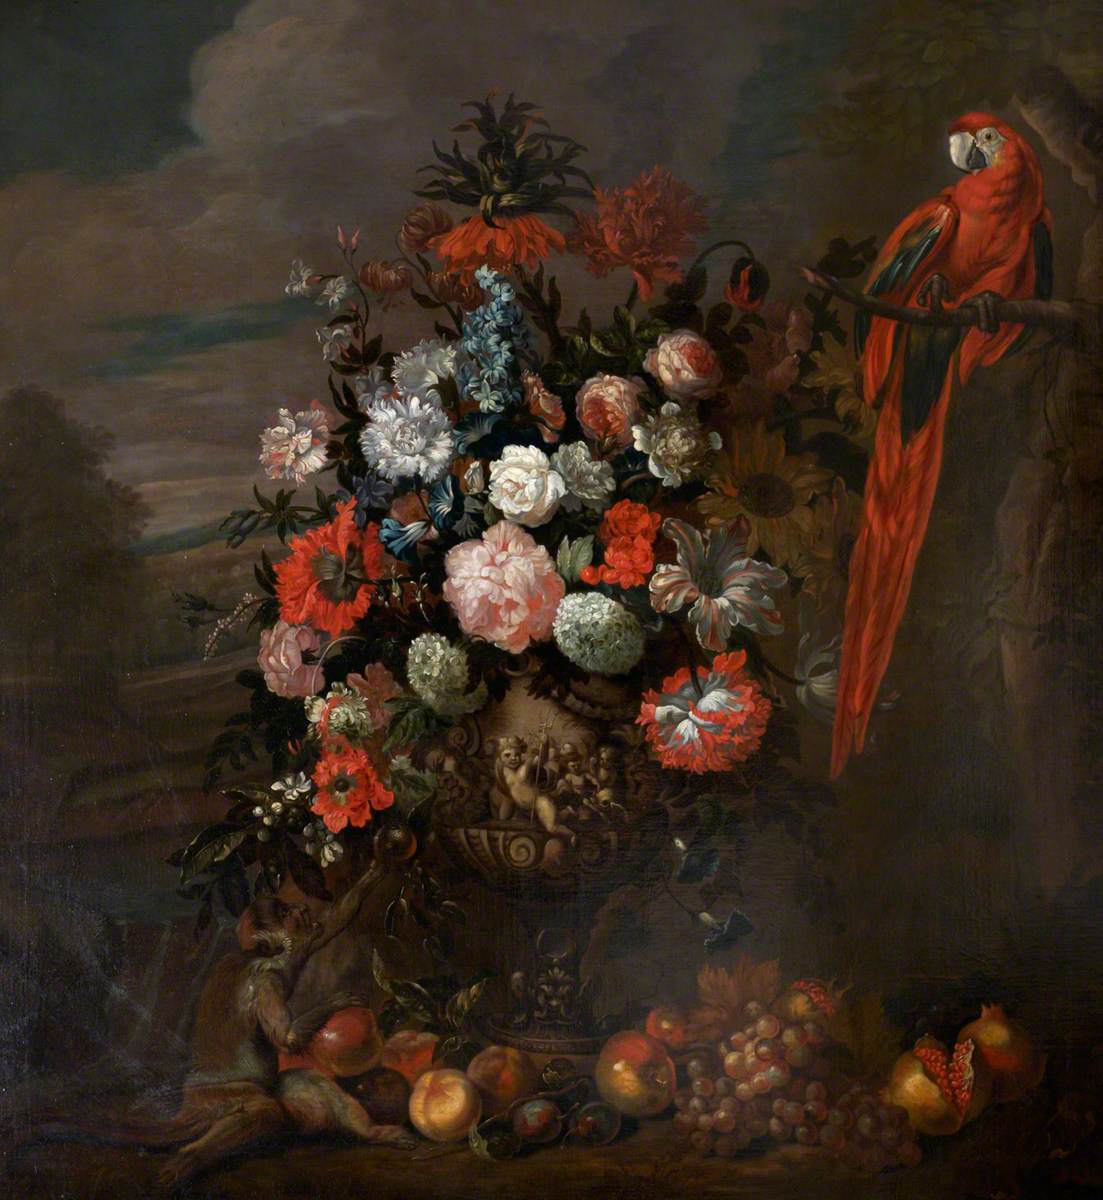 A Figured Vase of Flowers with a Monkey Teasing a Parrot